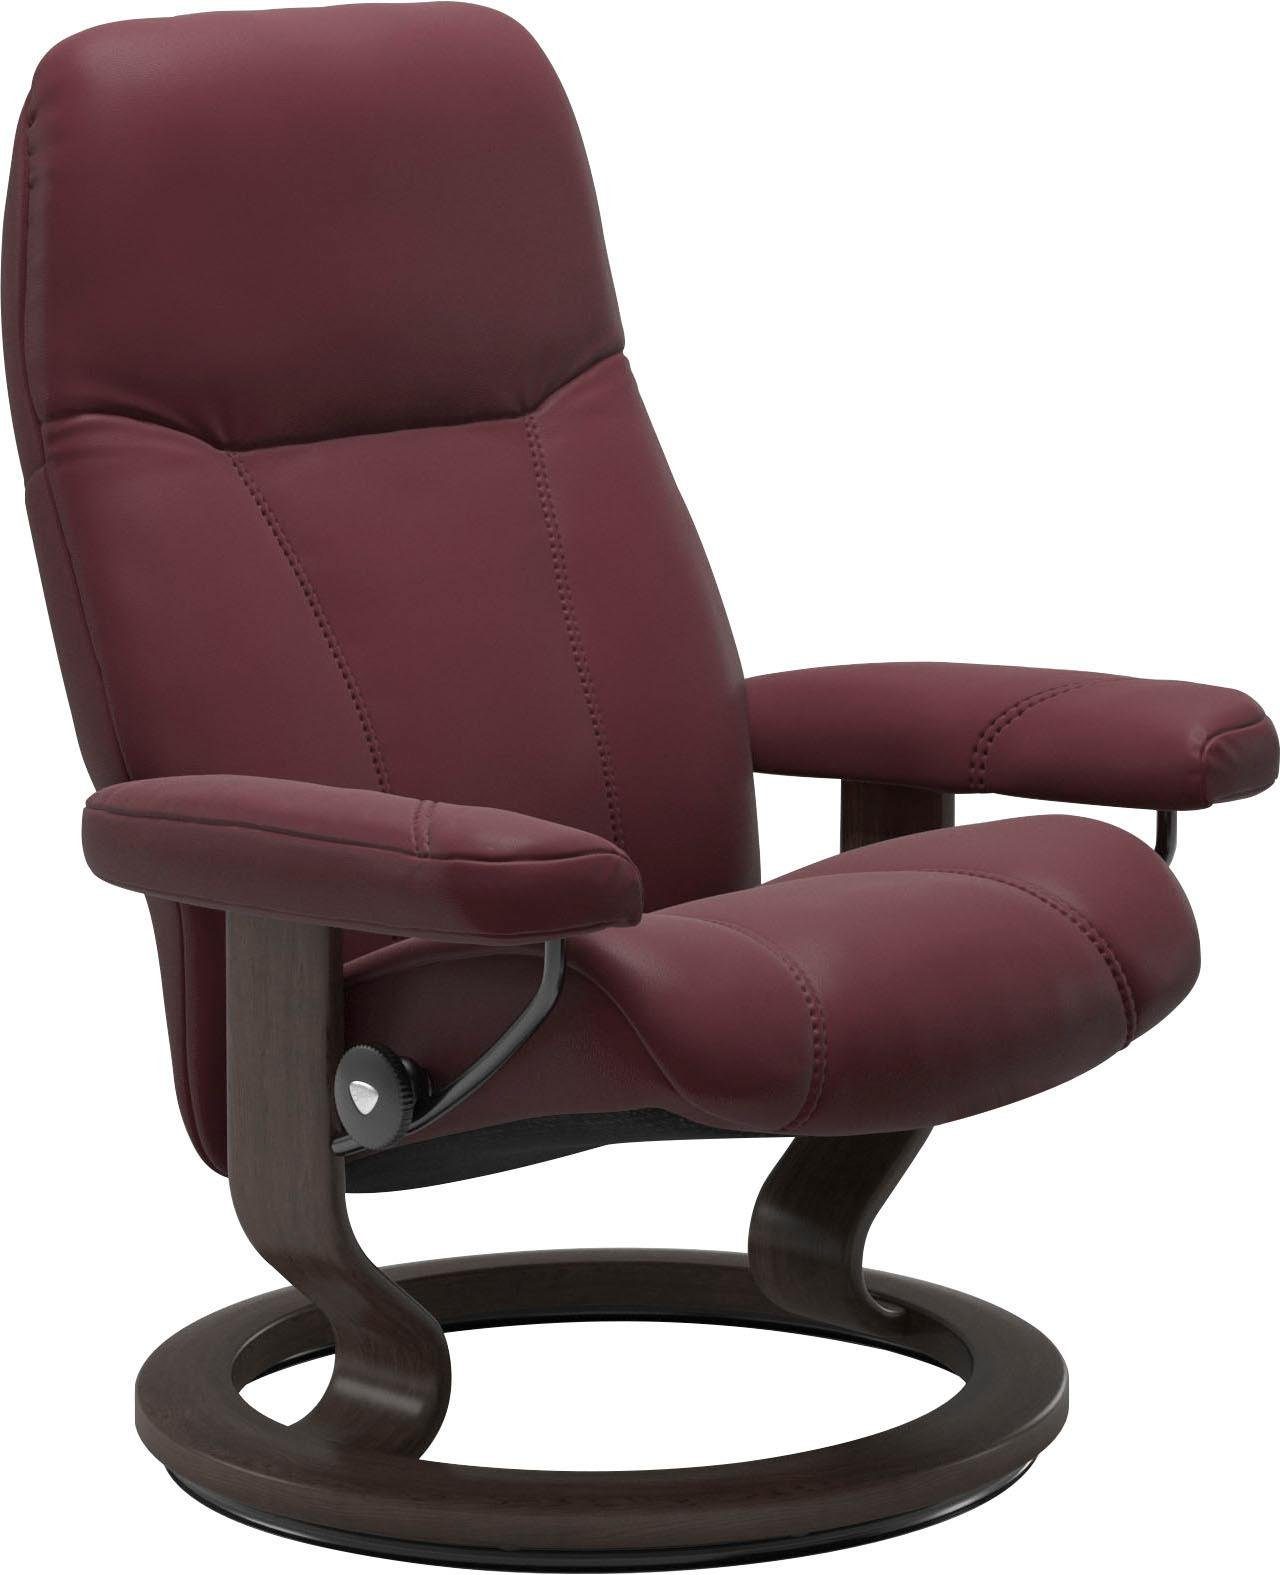 Stressless® Relaxsessel Consul, mit Classic Base, Größe S, Gestell Wenge | Funktionssessel